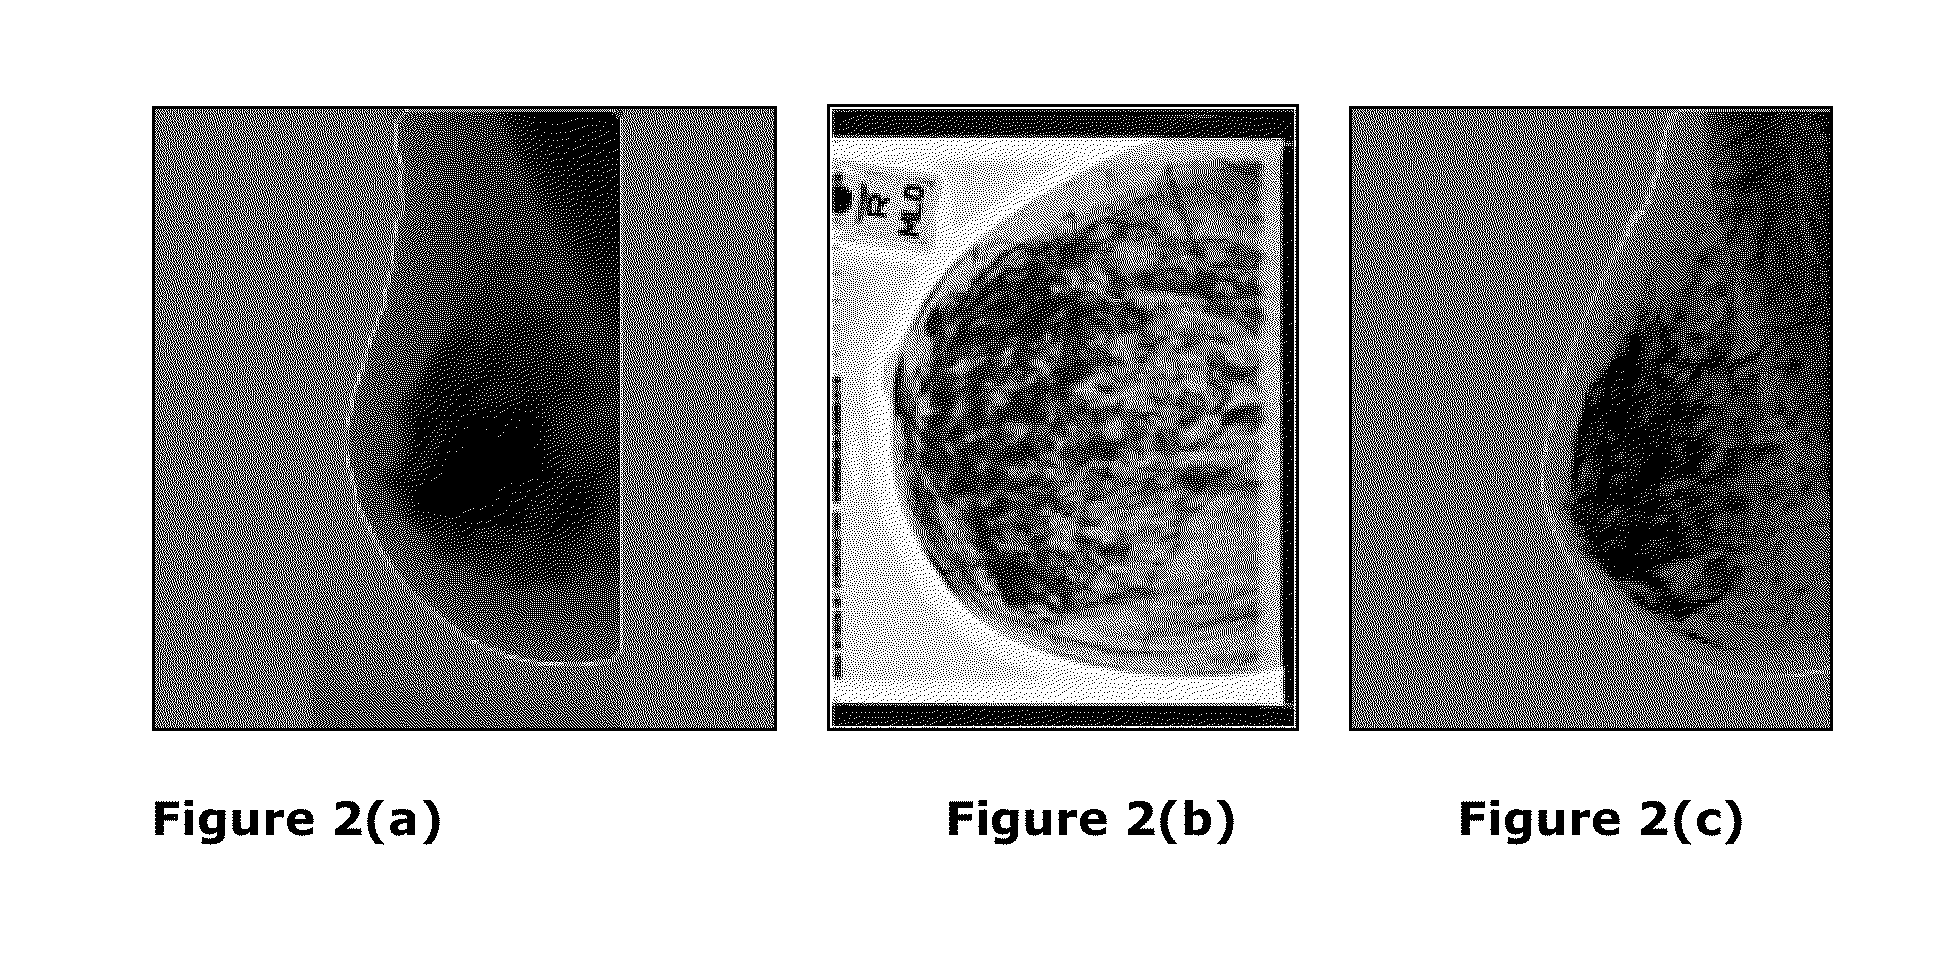 Method and system to detect the microcalcifications in X-ray images using nonlinear energy operator